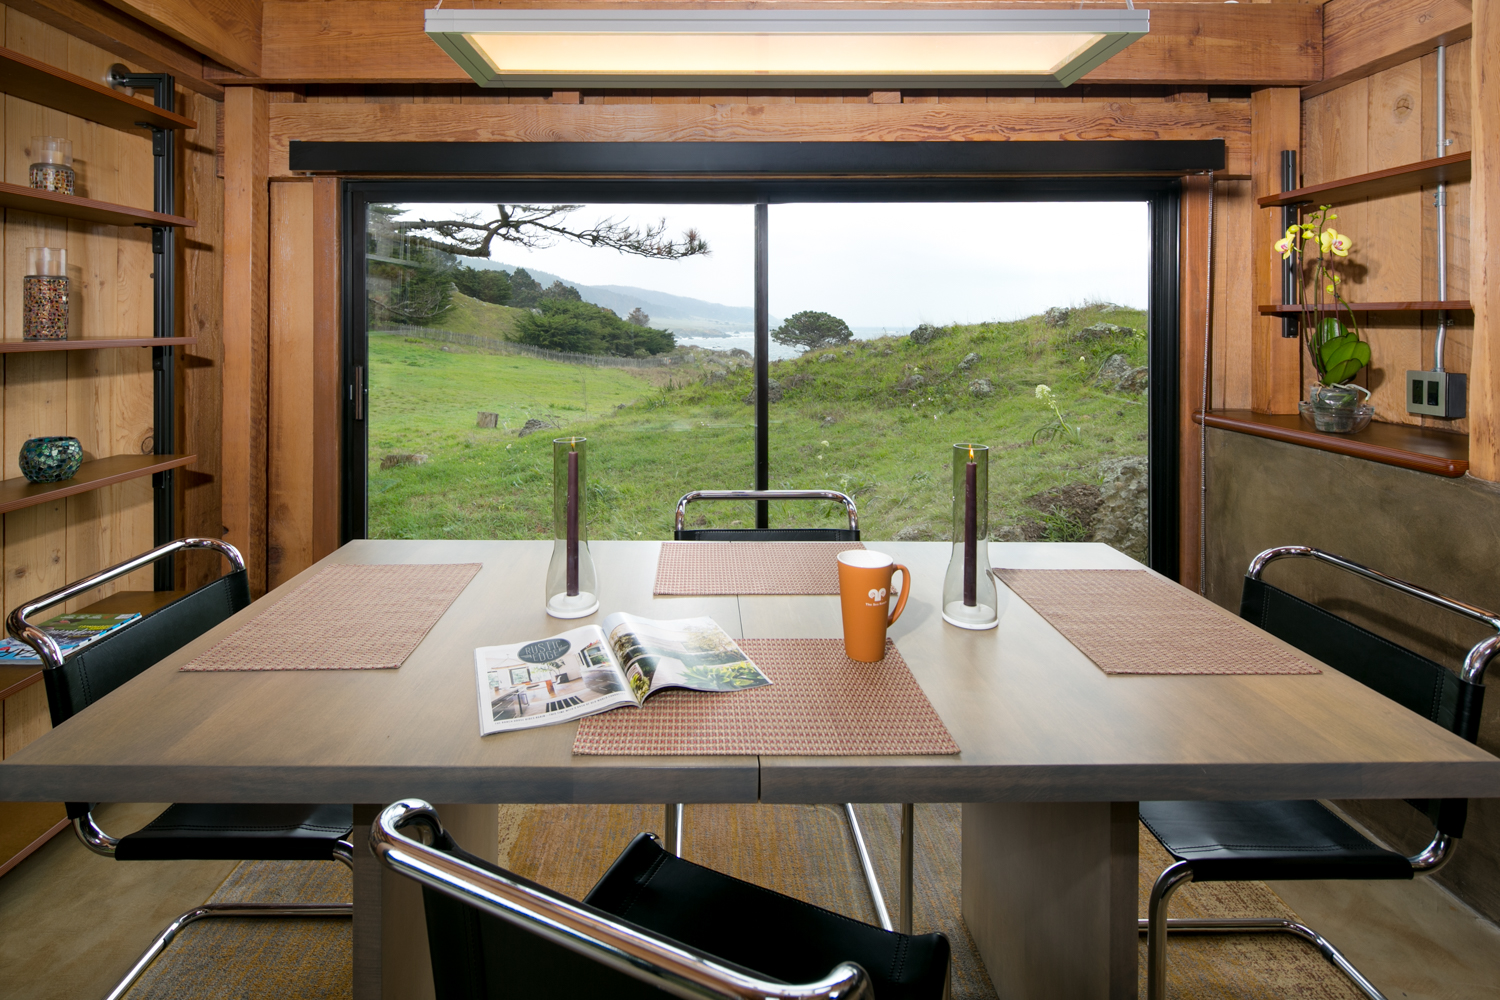 Sea Ranch California Architecture Art by brightroomSF Architectural Photography San Francisco-31.jpg